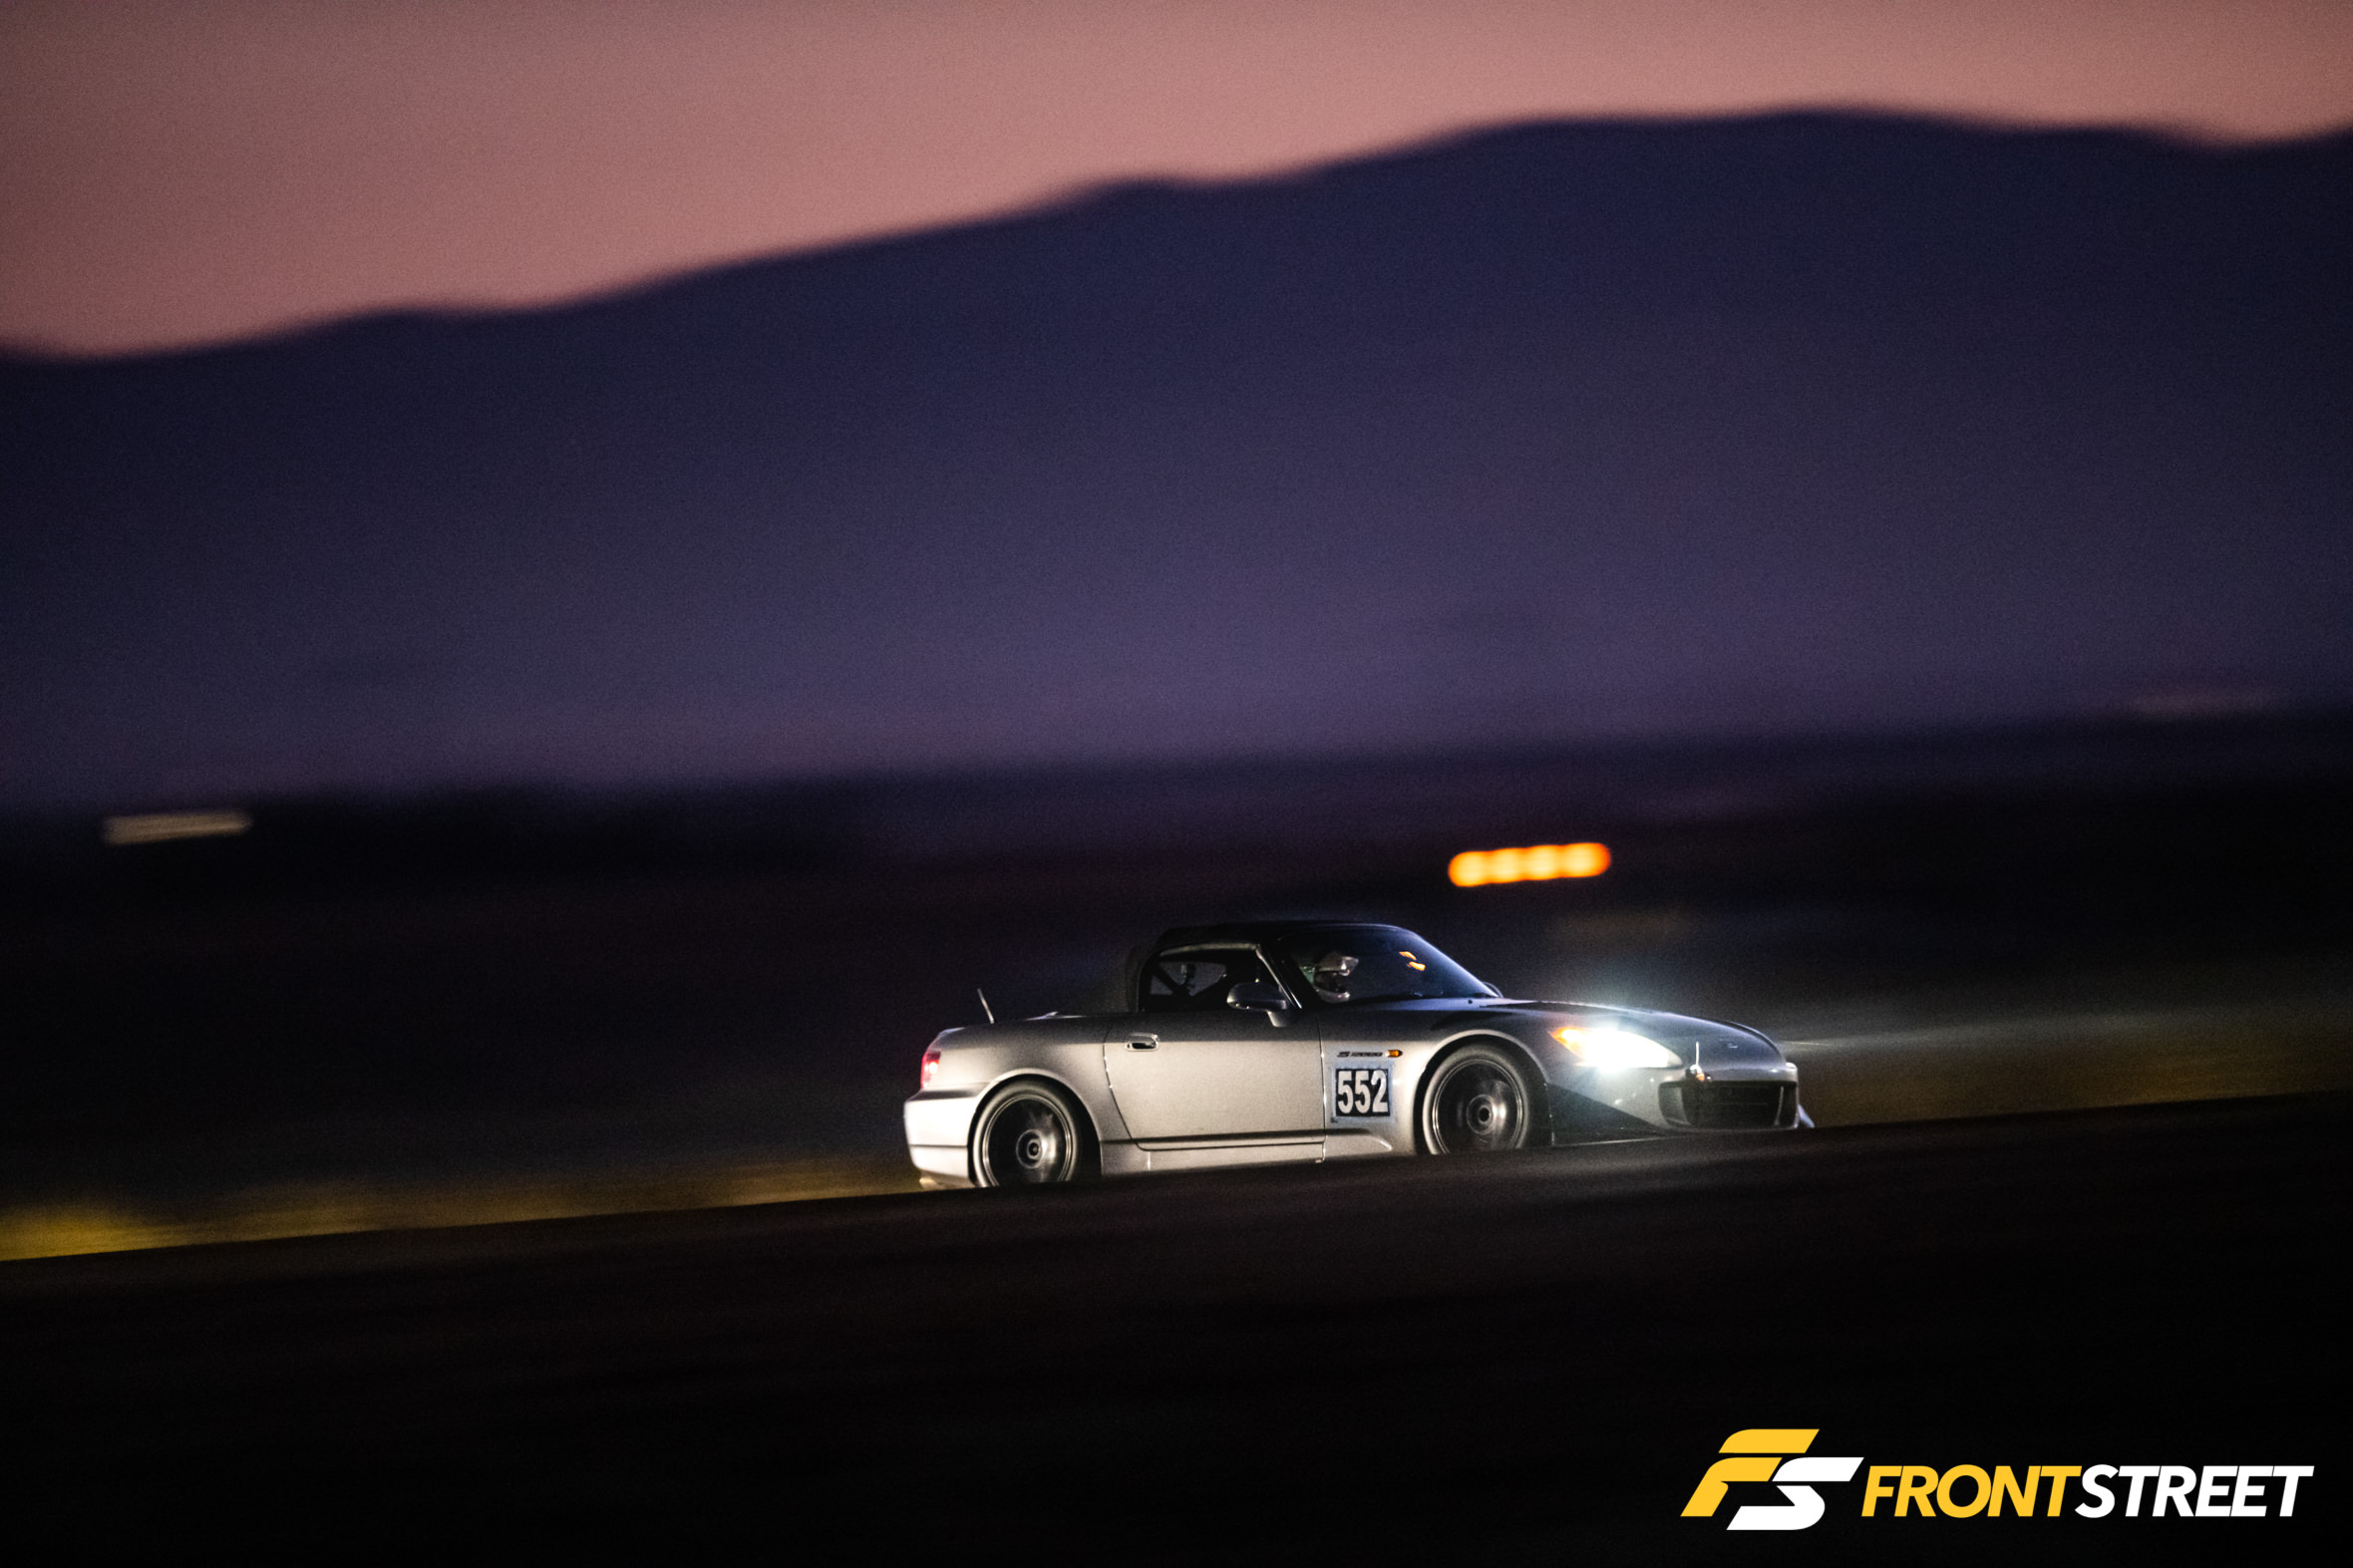 In The Heat Of The Night: 2019 VTEC Club Round 3